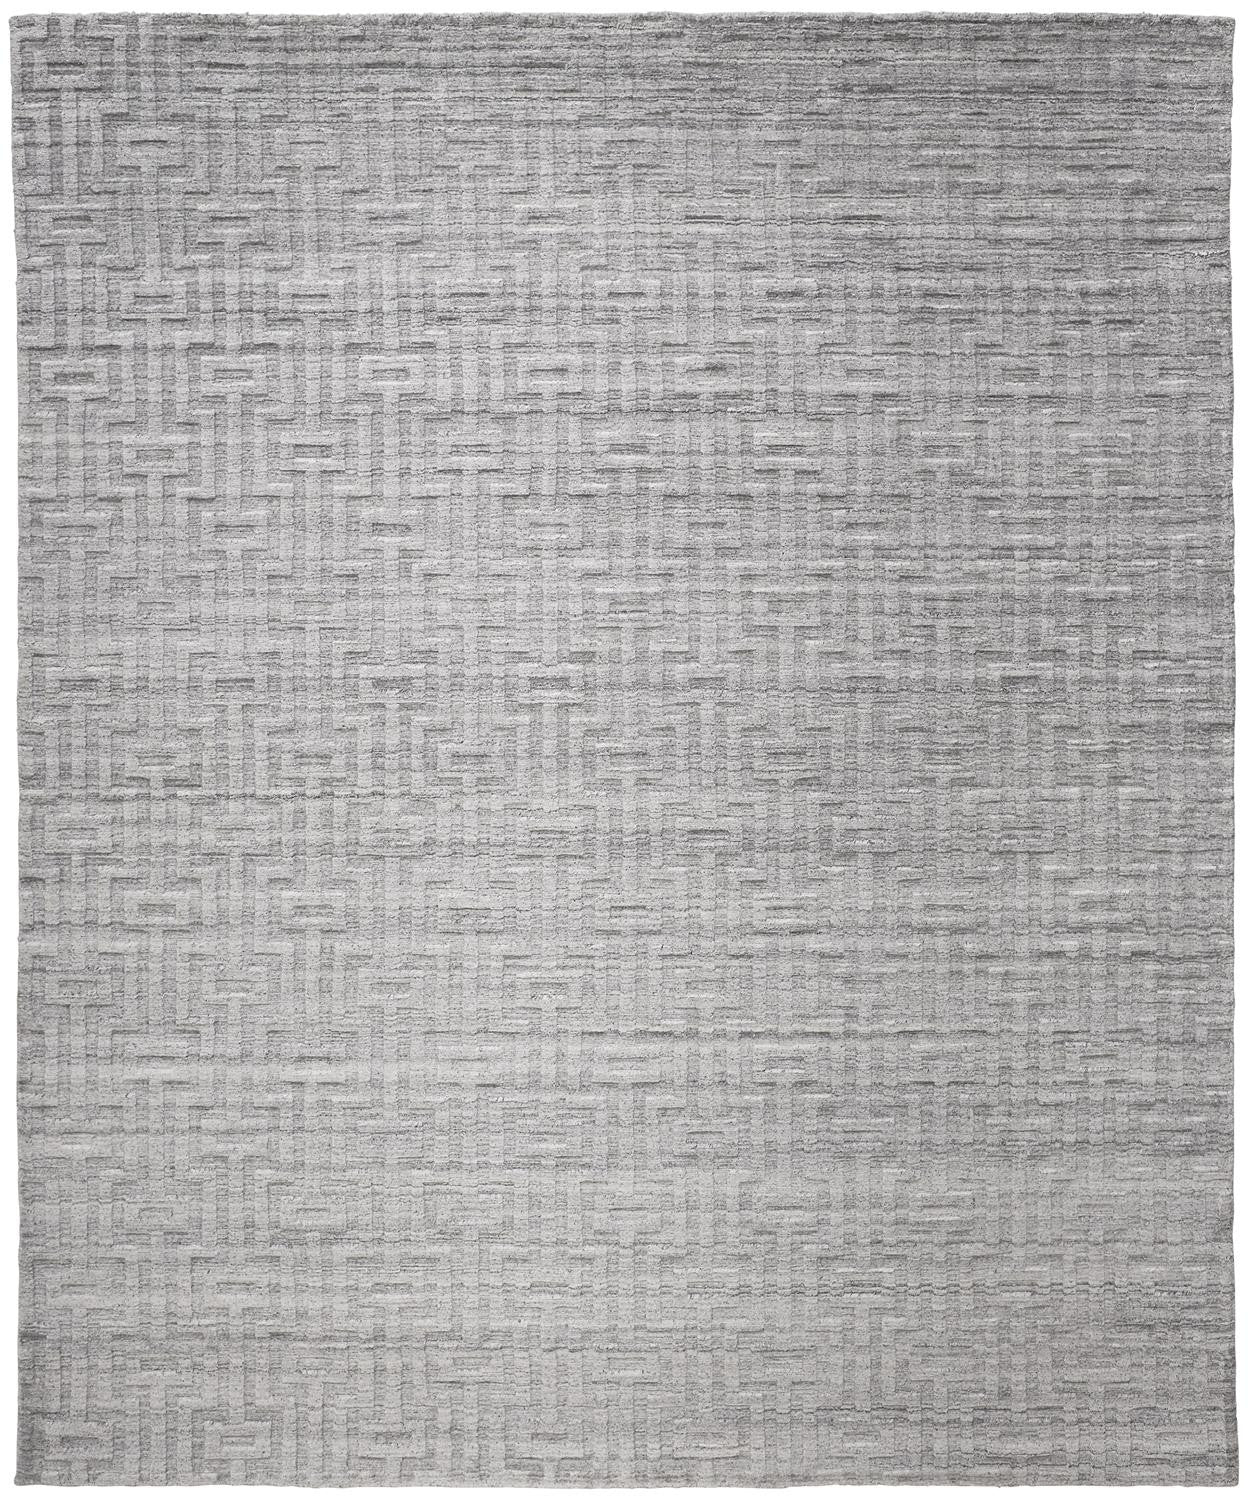 5' X 8' Silver Floral Hand Woven Area Rug